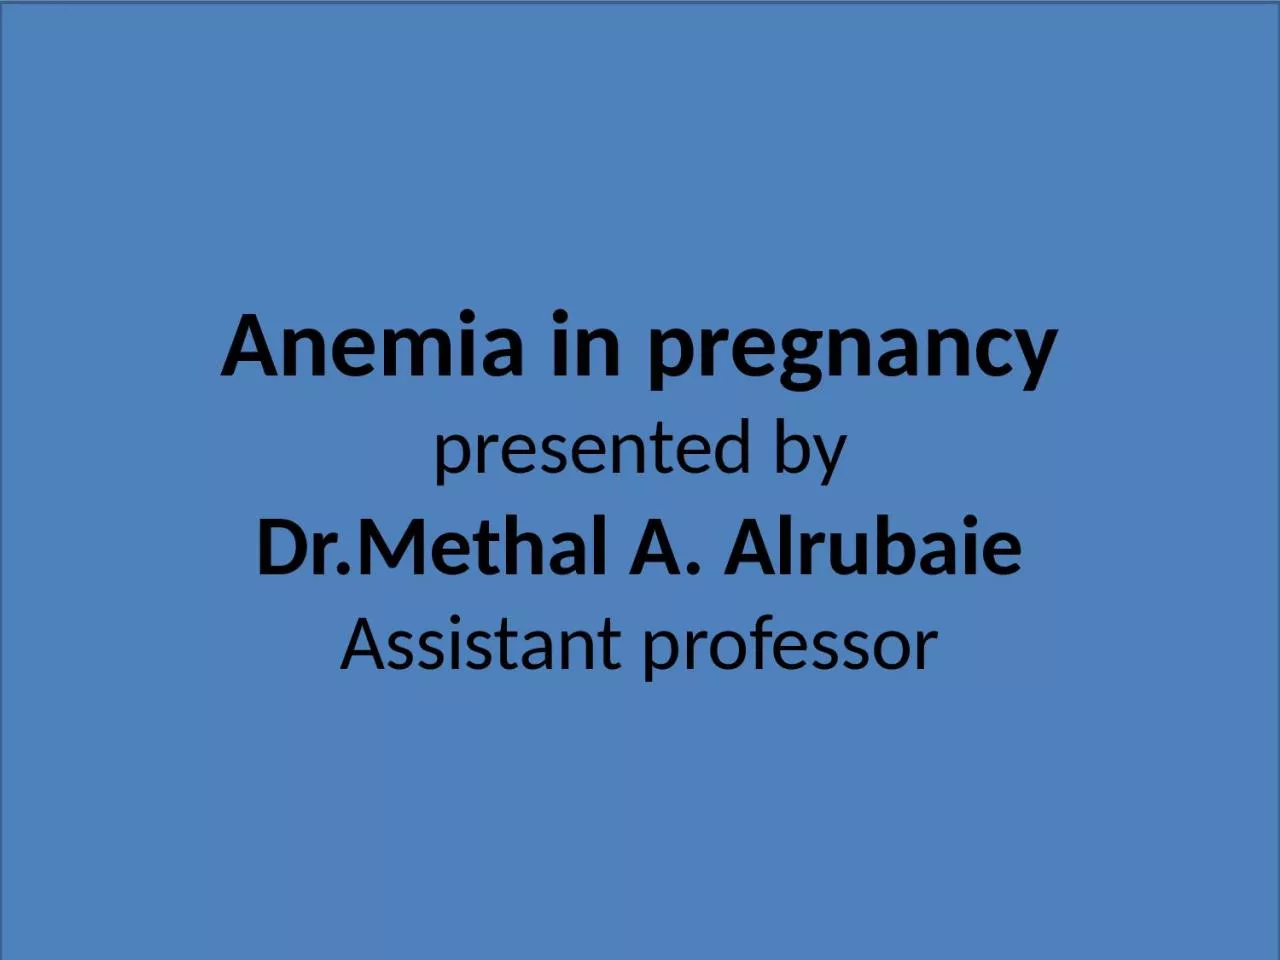 Anemia in pregnancy presented by